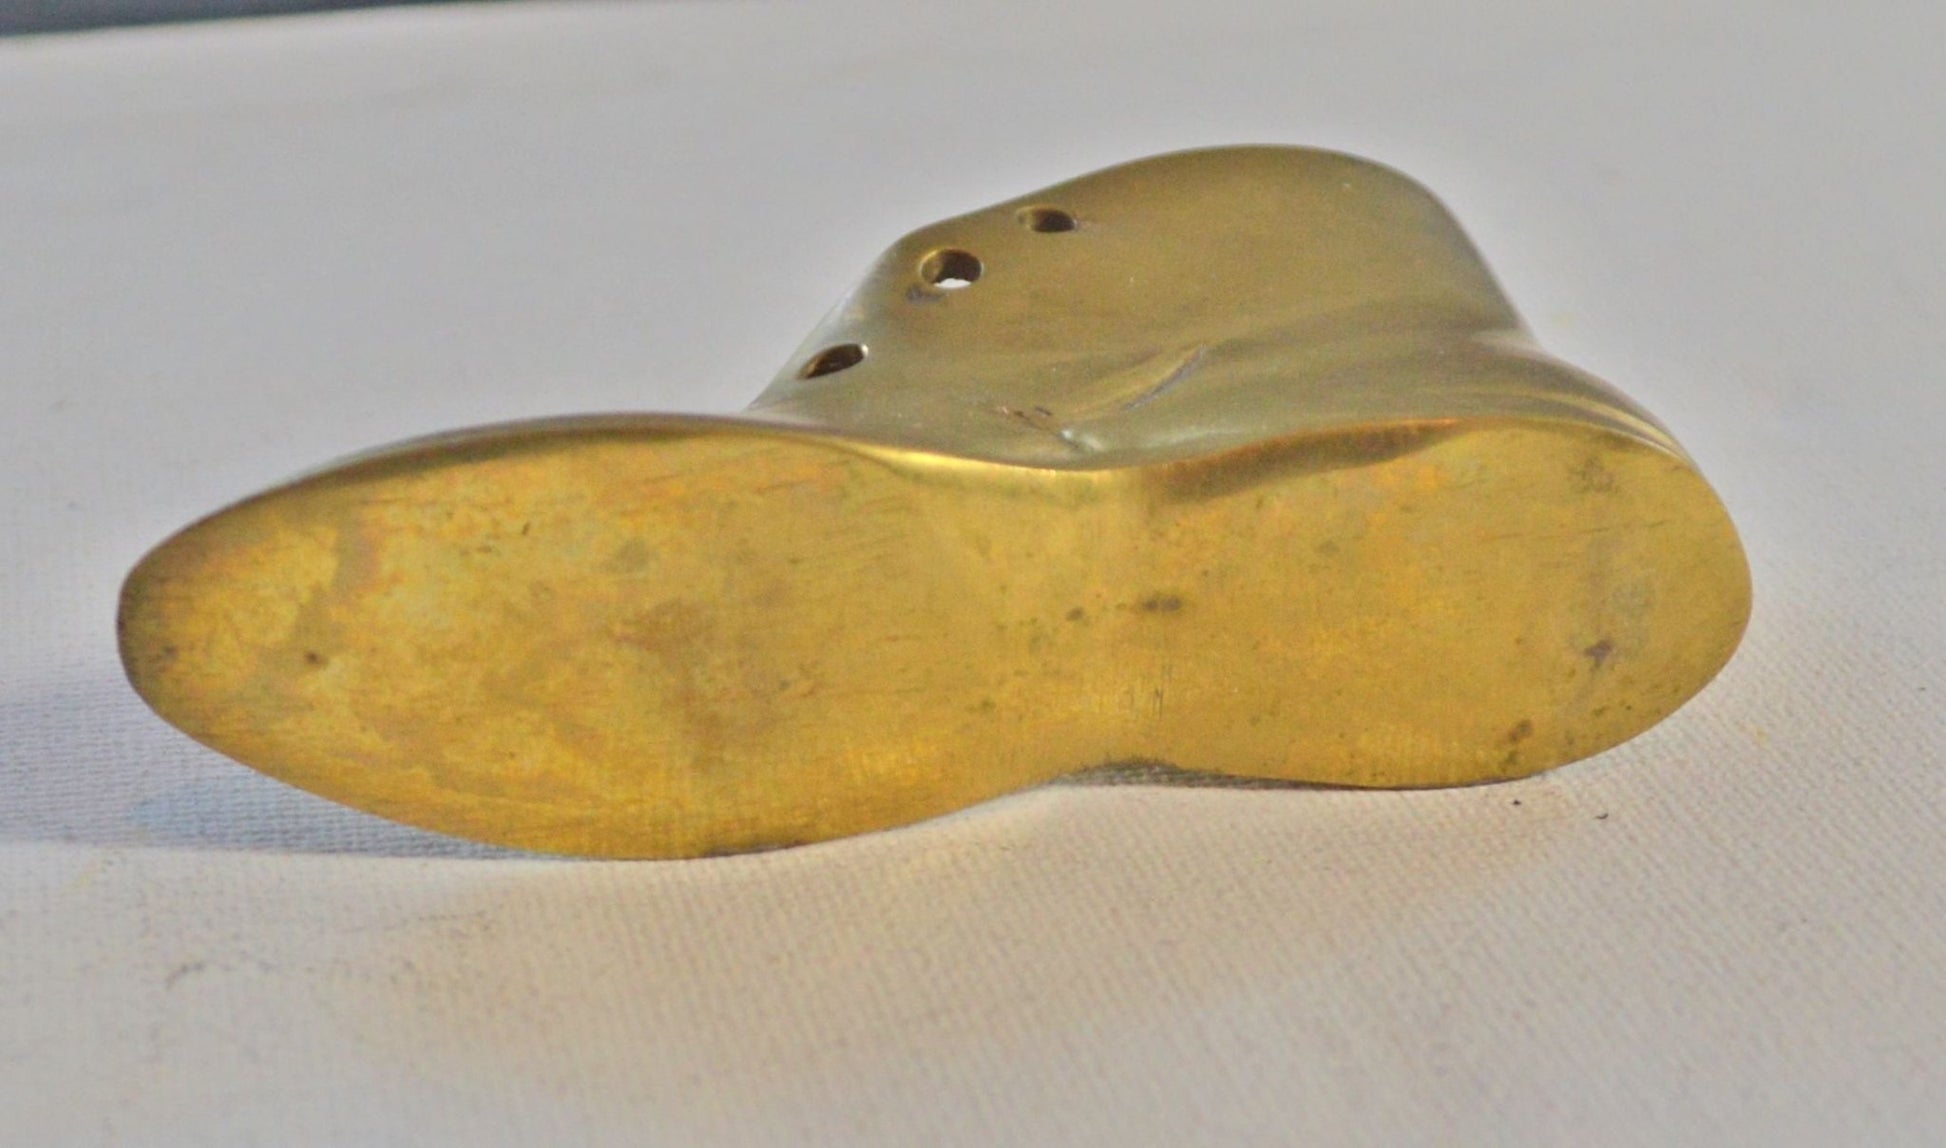 BRASS BOOT(PREVIOUSLY OWNED) GOOD CONDITION - TMD167207